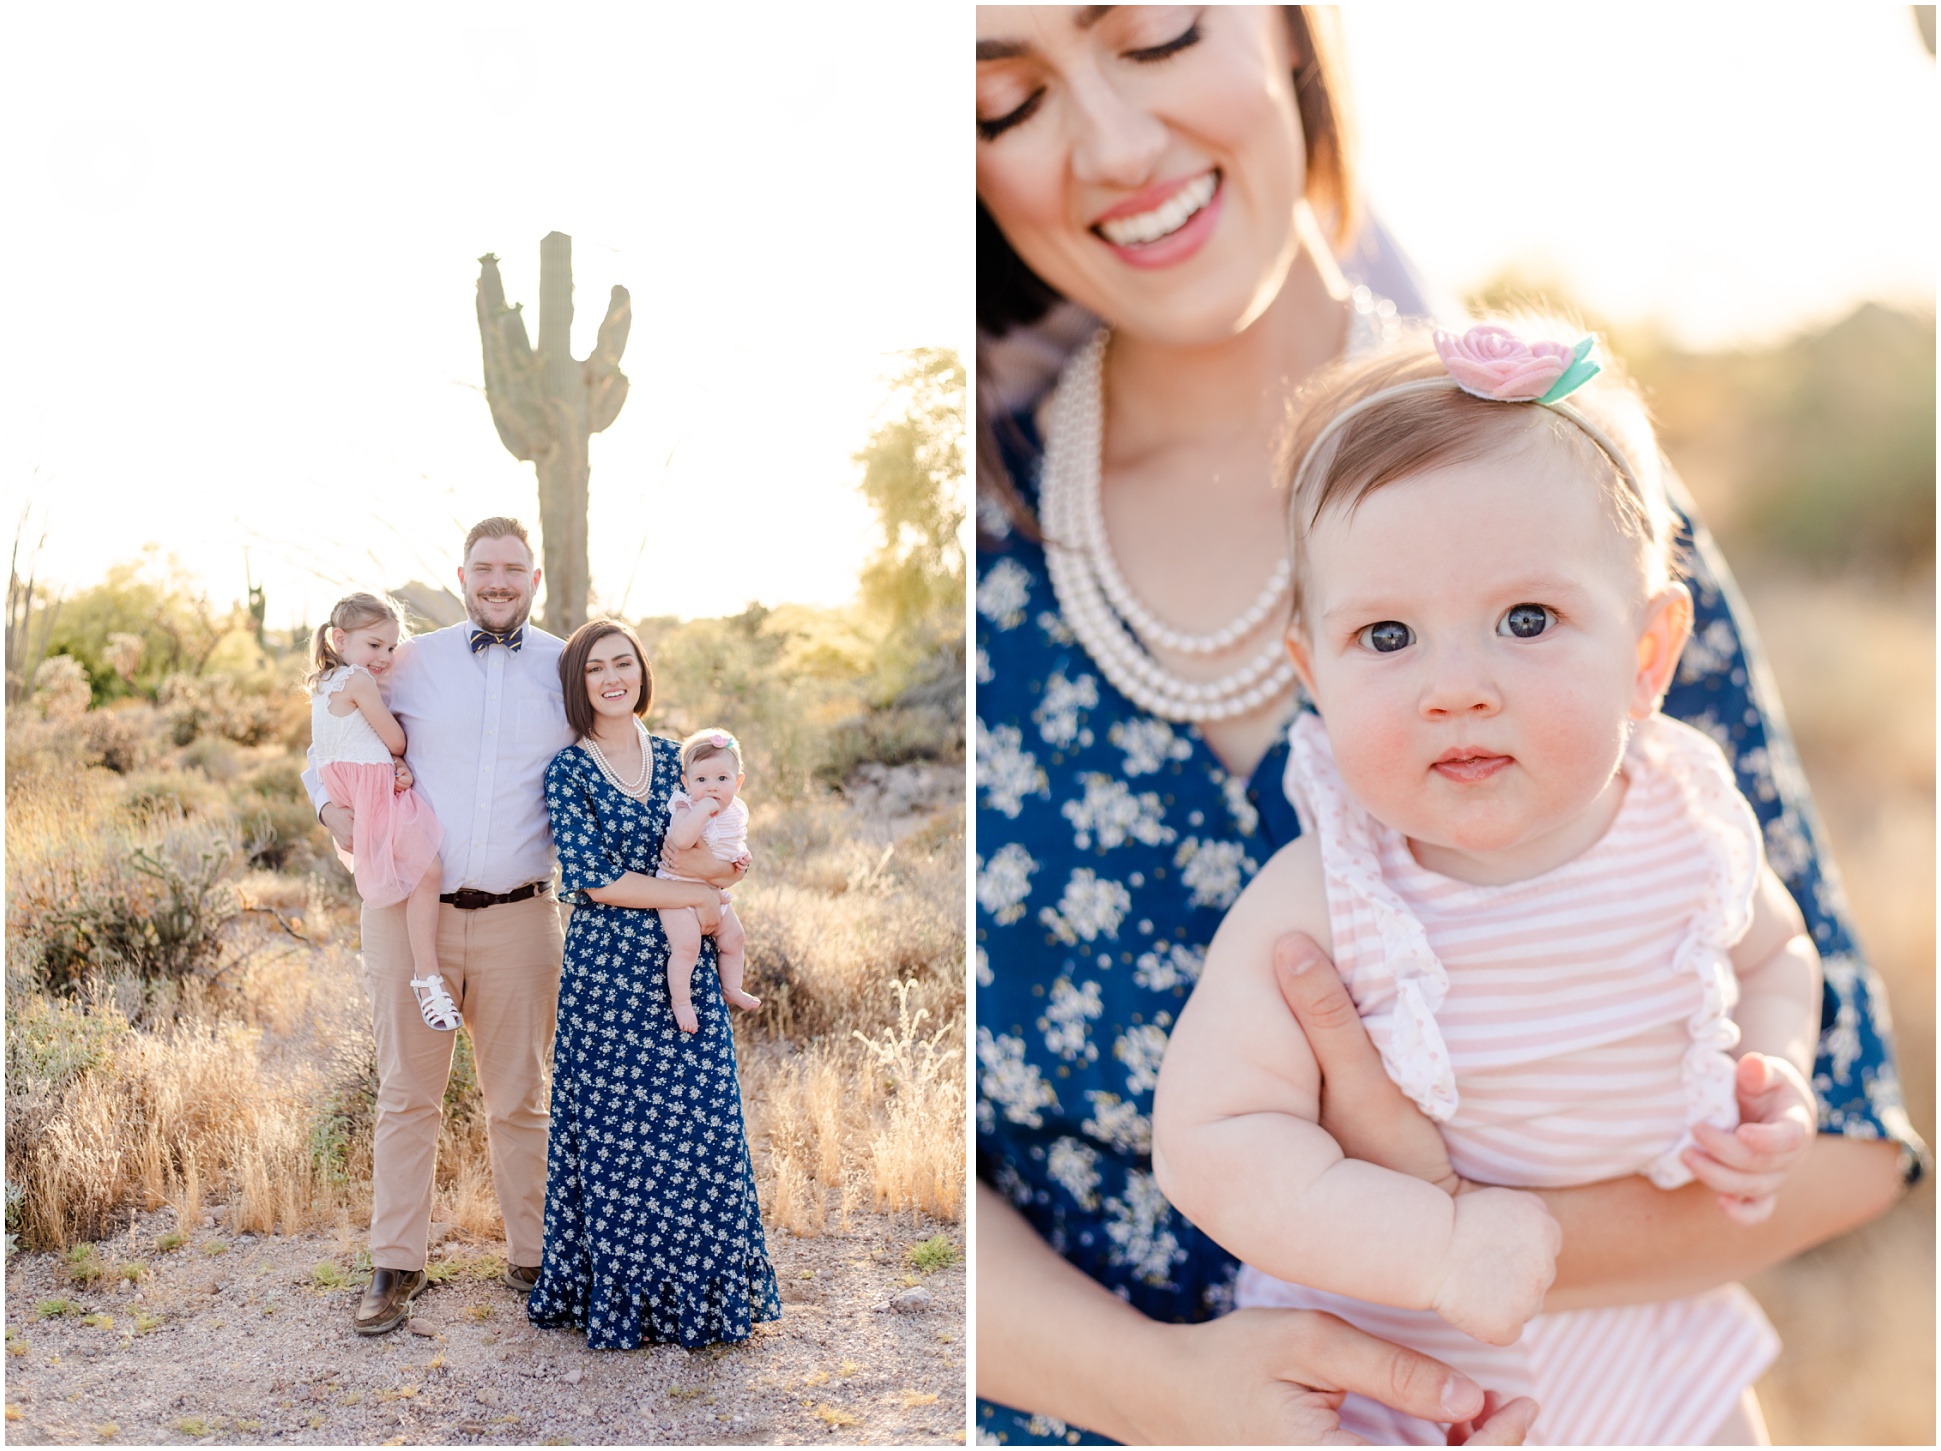 Left: Family of Four in front of saguaro, Right: Baby Elli in her mom's arms